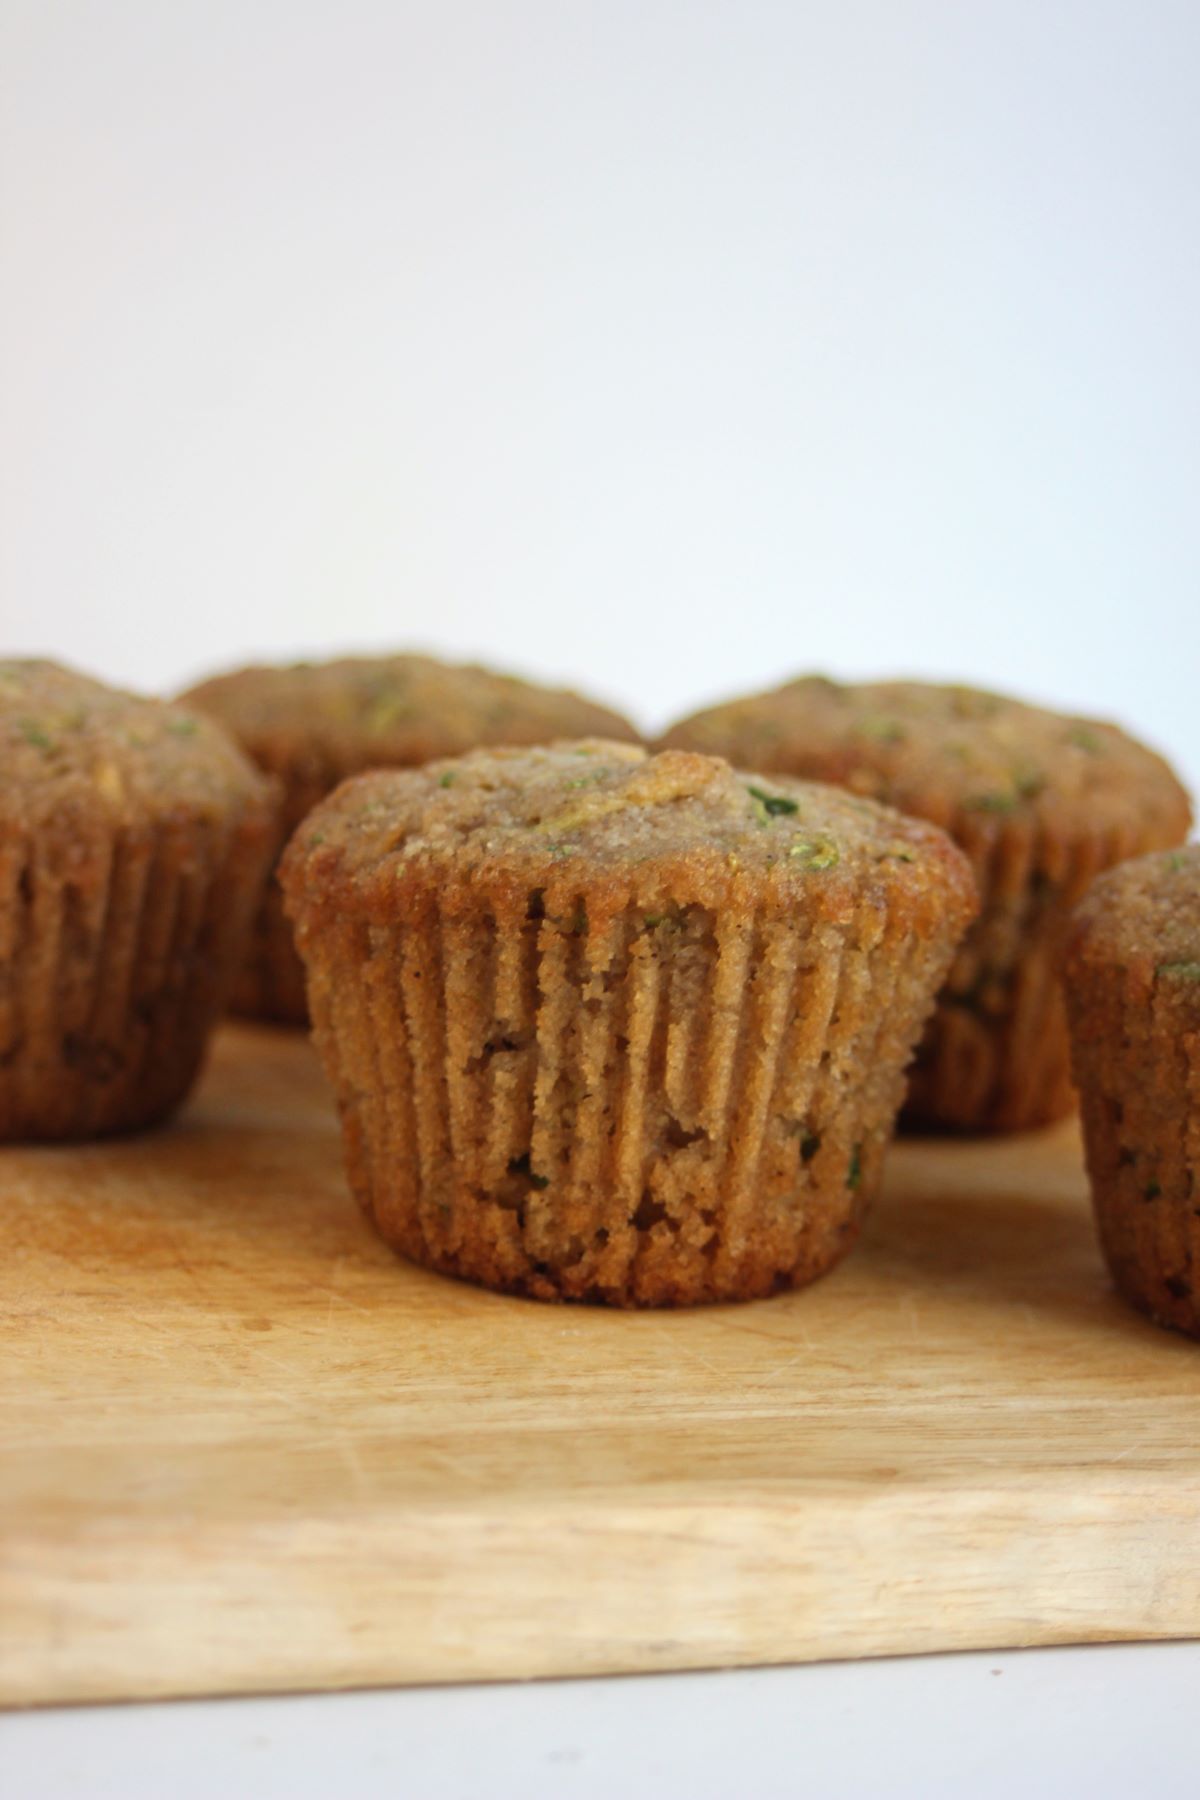 Zucchini muffins on a wooden board.